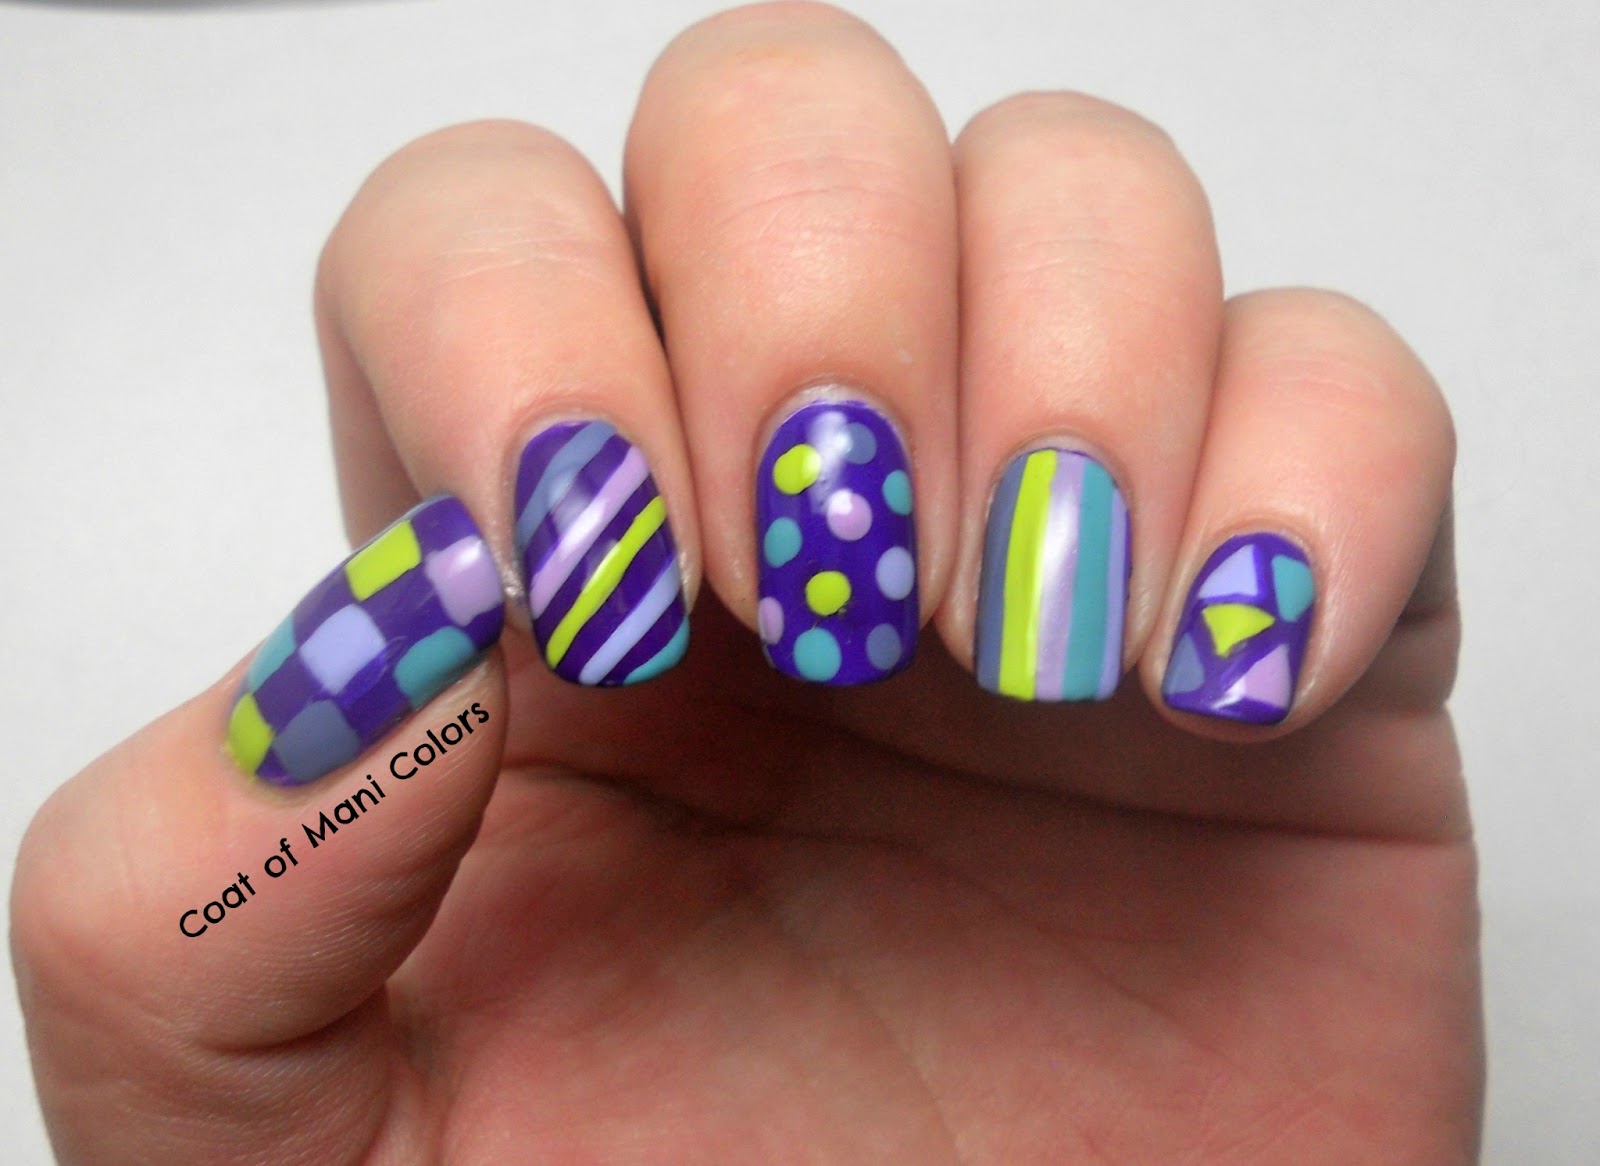 Coat of Mani Colors: 31 Day Challenge- Skittle!